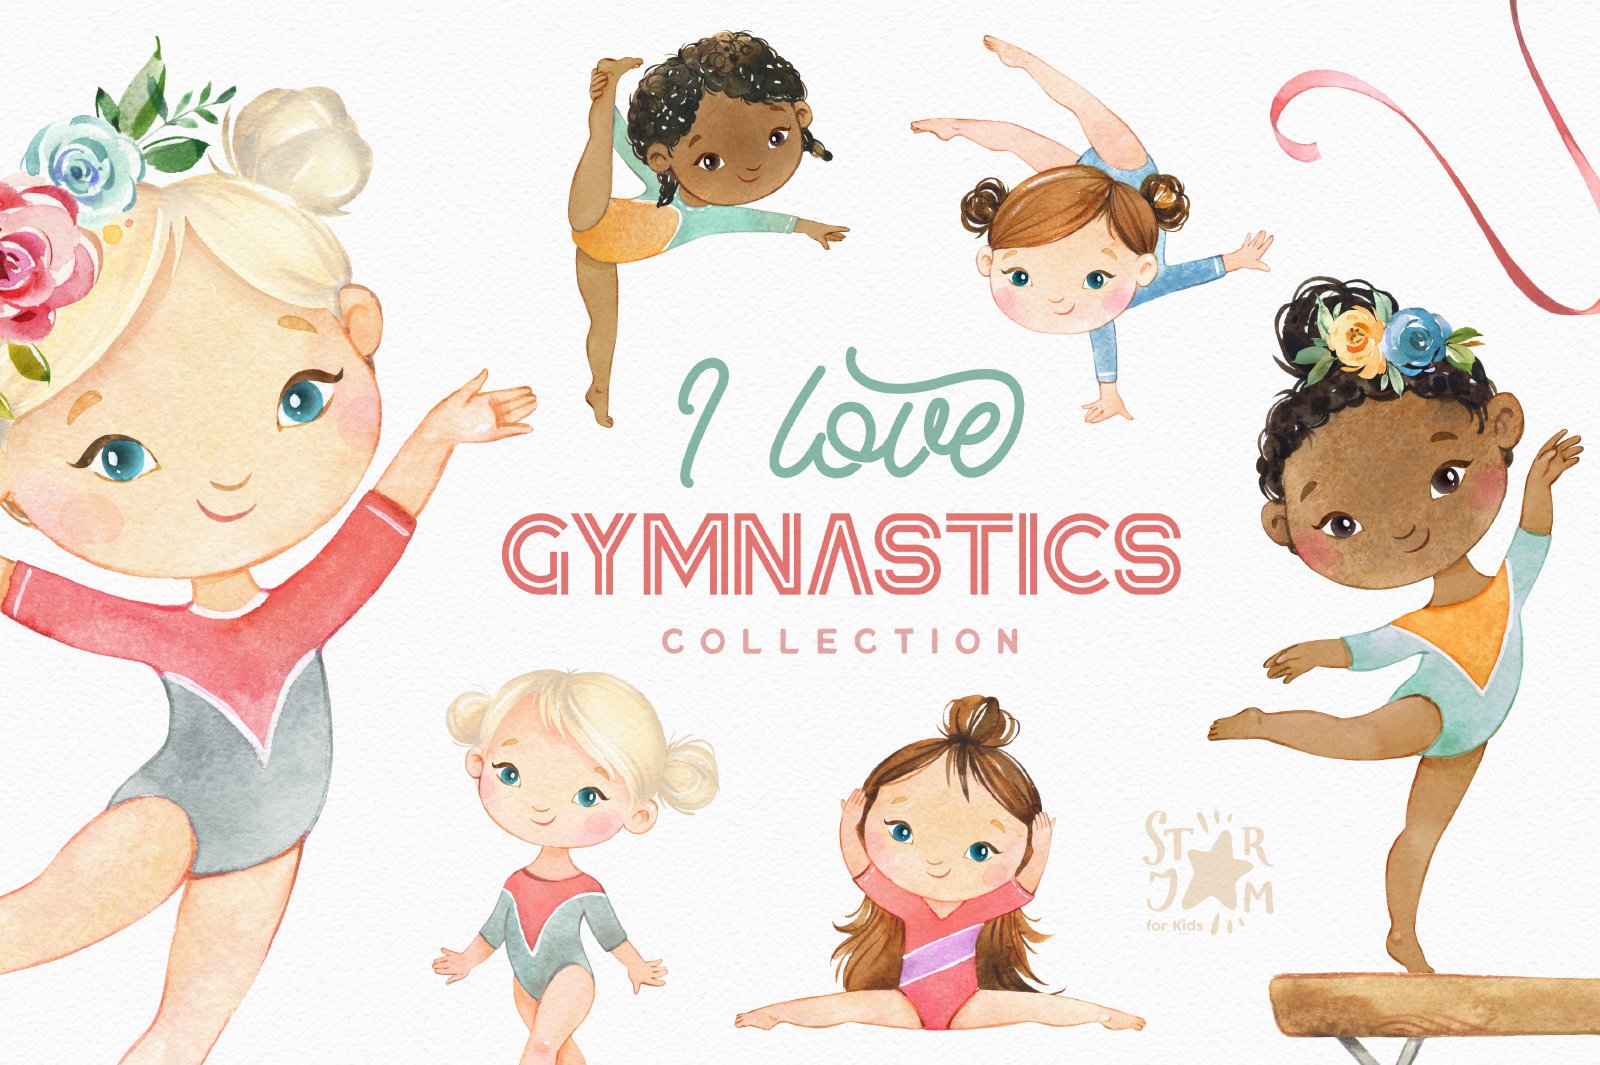 I Love Gymnastics. Sports Collection cover image.